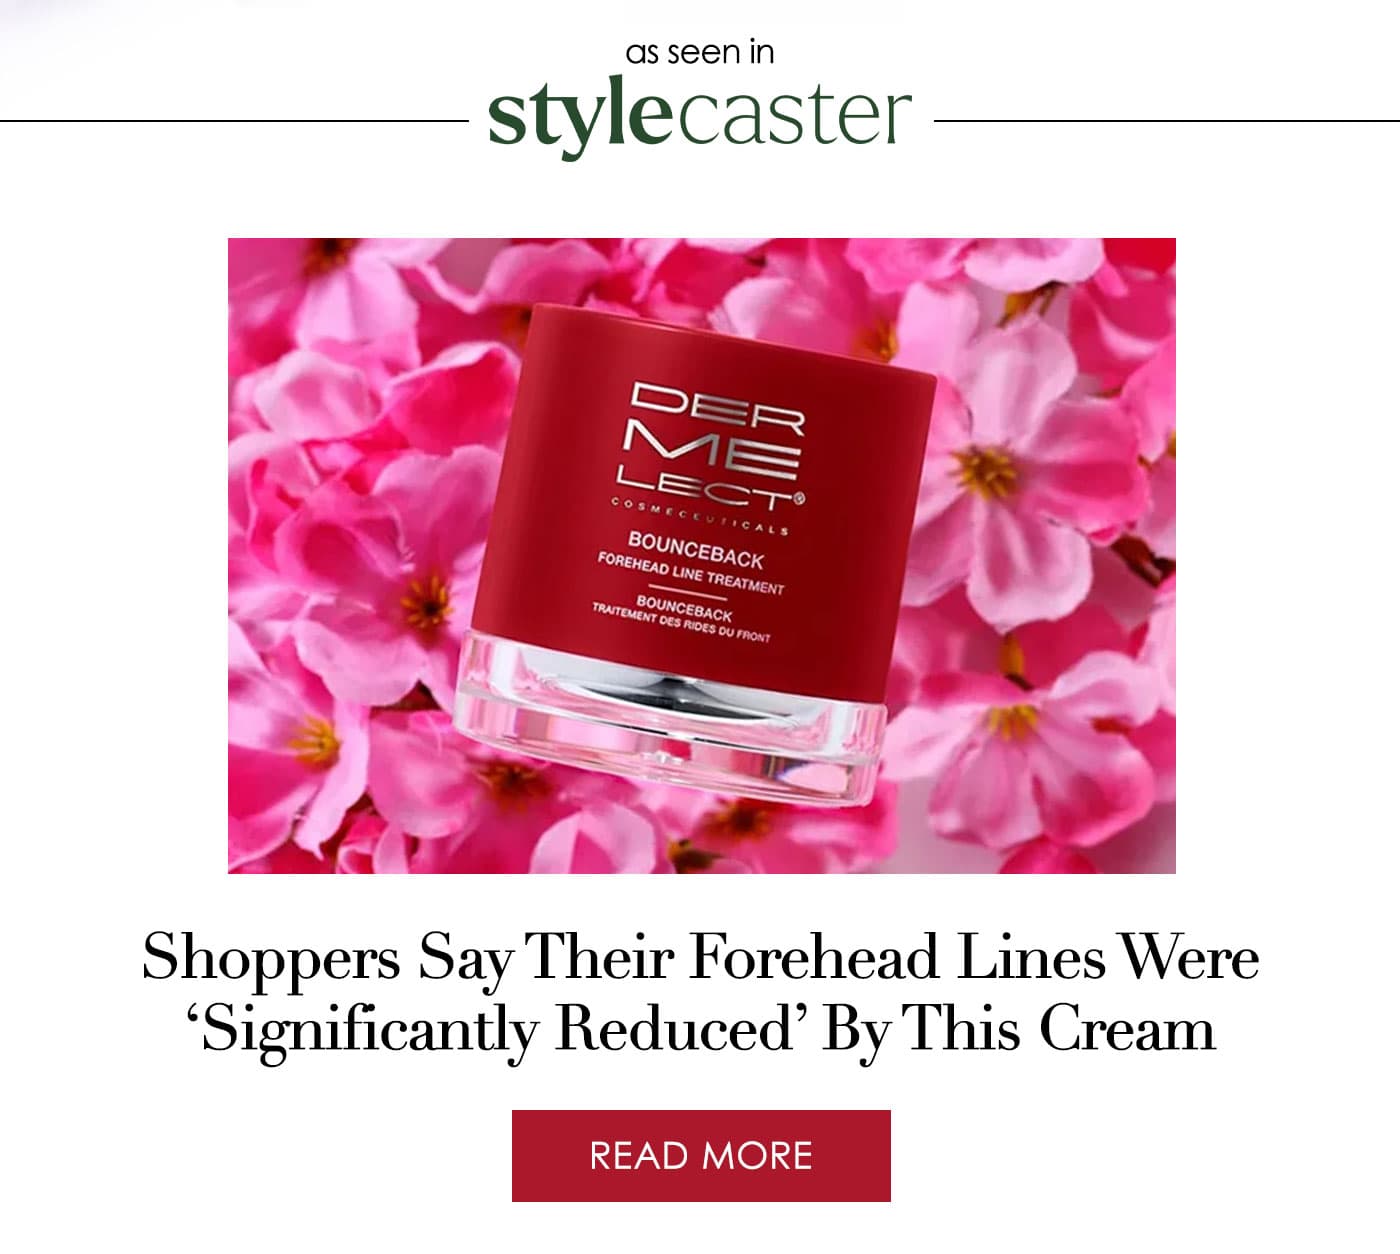 Shoppers Say Their Forehead Lines Were ‘Significantly Reduced’ By This Cream